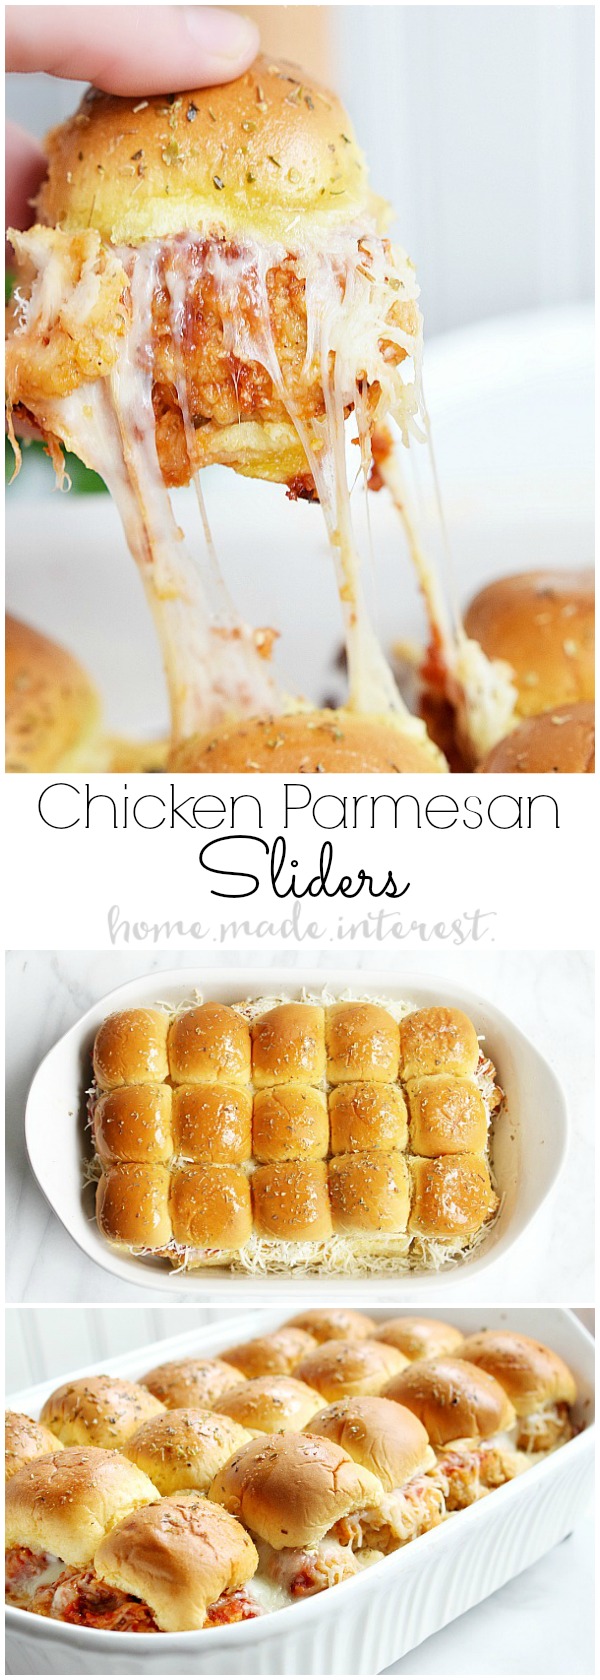 16 cheesy chicken recipes that will knock your socks off. Yummy cheesy chicken flavors that say I'm the picture of comfort food! These Chicken Parmesan sliders are an easy recipe that everyone is going to love. Fried chicken tenders, tomato sauce, and lots of mozzarella cheese make this slider recipe a sure win. Whether it is a game day recipe or a fatherâs day recipe you are looking for you canât go wrong with sliders. 